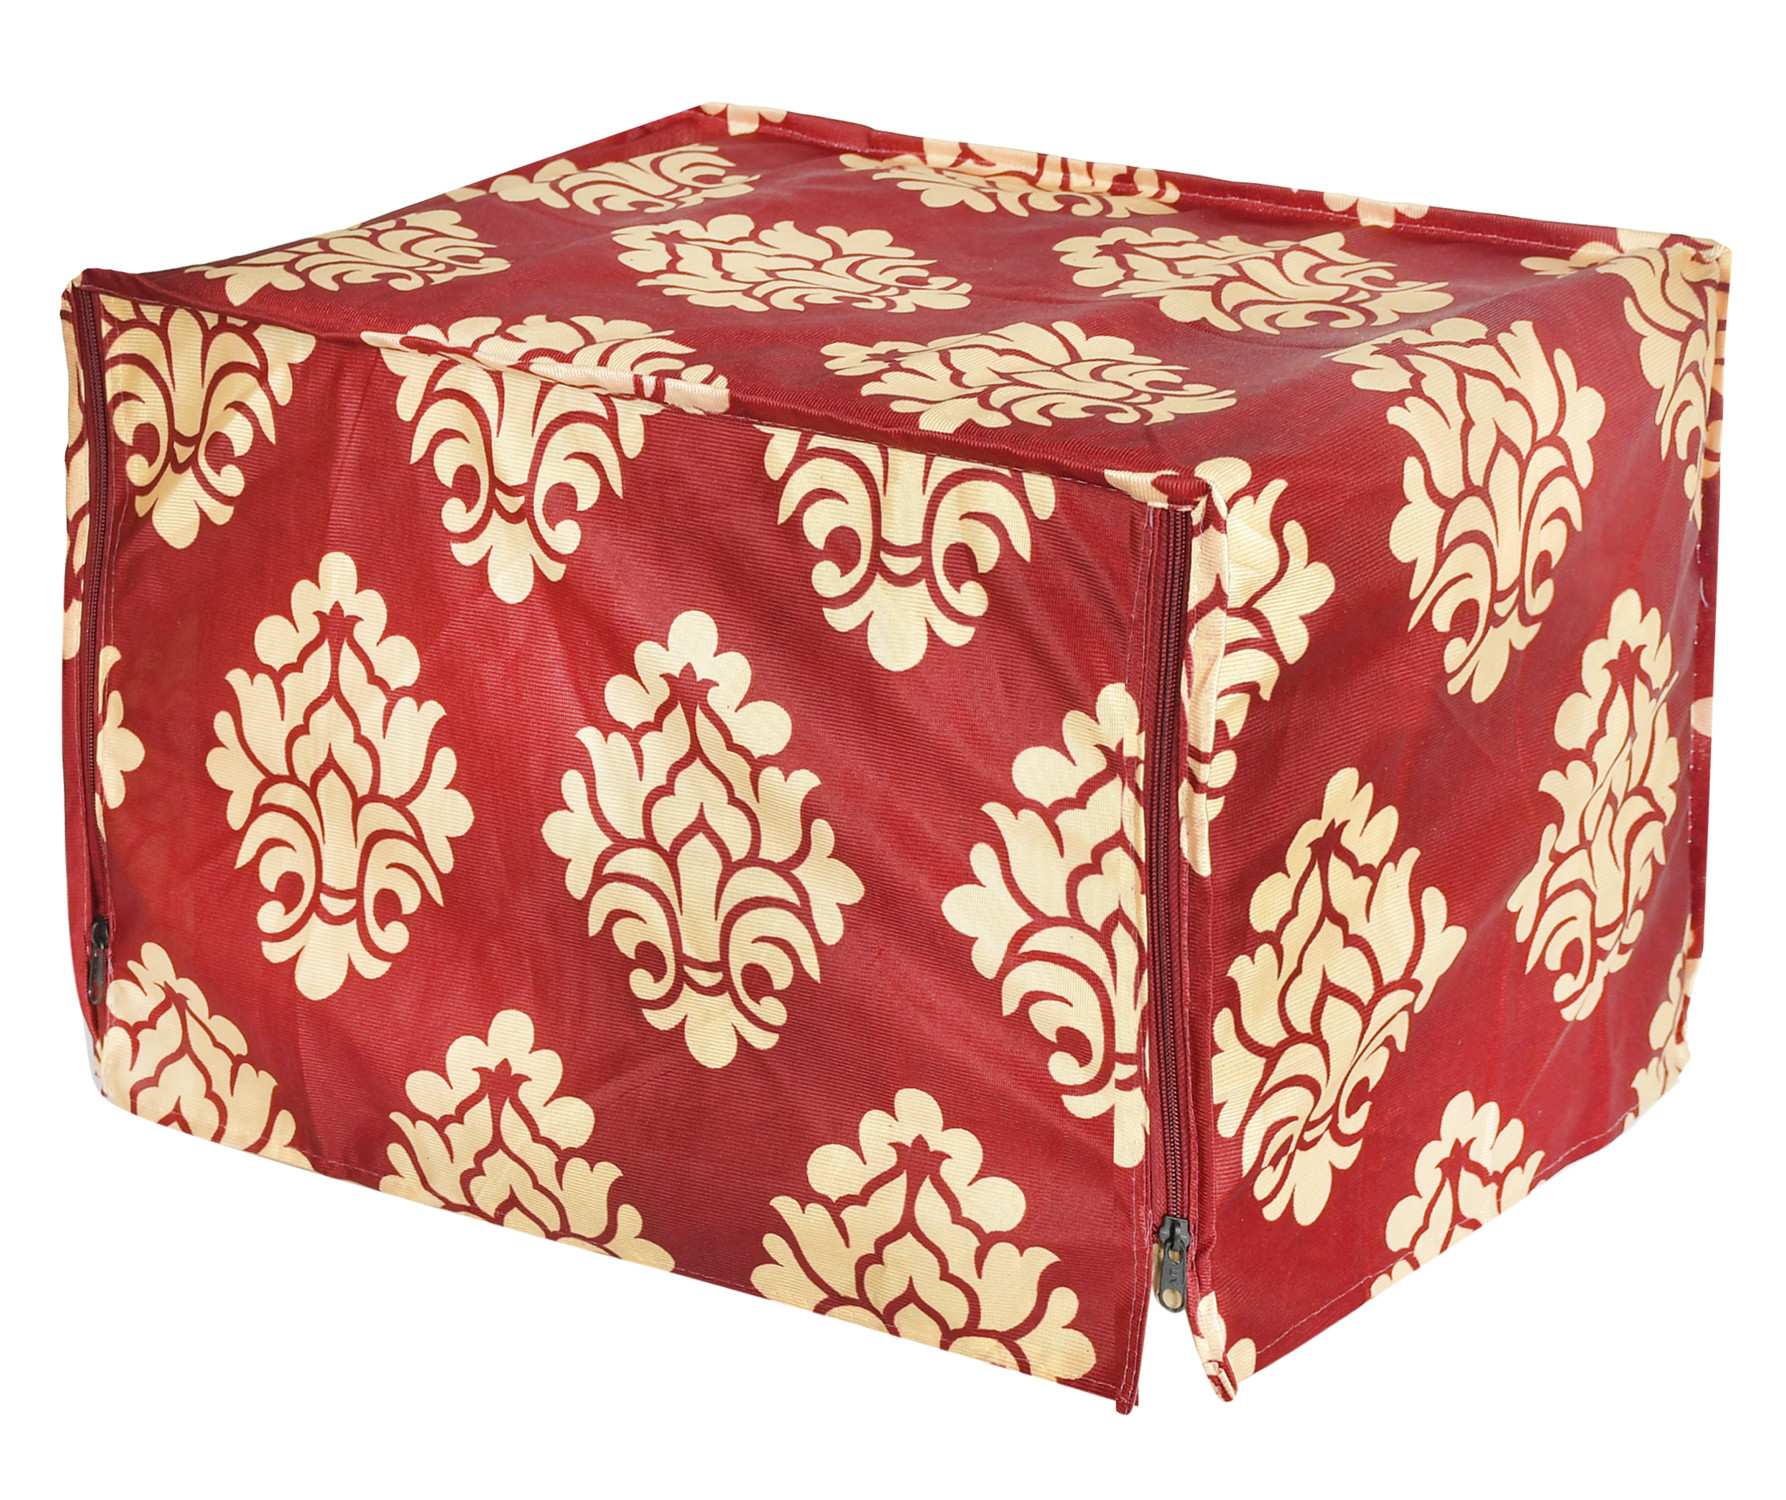 Kuber Industries Polyster Floral Printed Microwave Oven Cover,25 Ltr. (Maroon)-HS43KUBMART25941